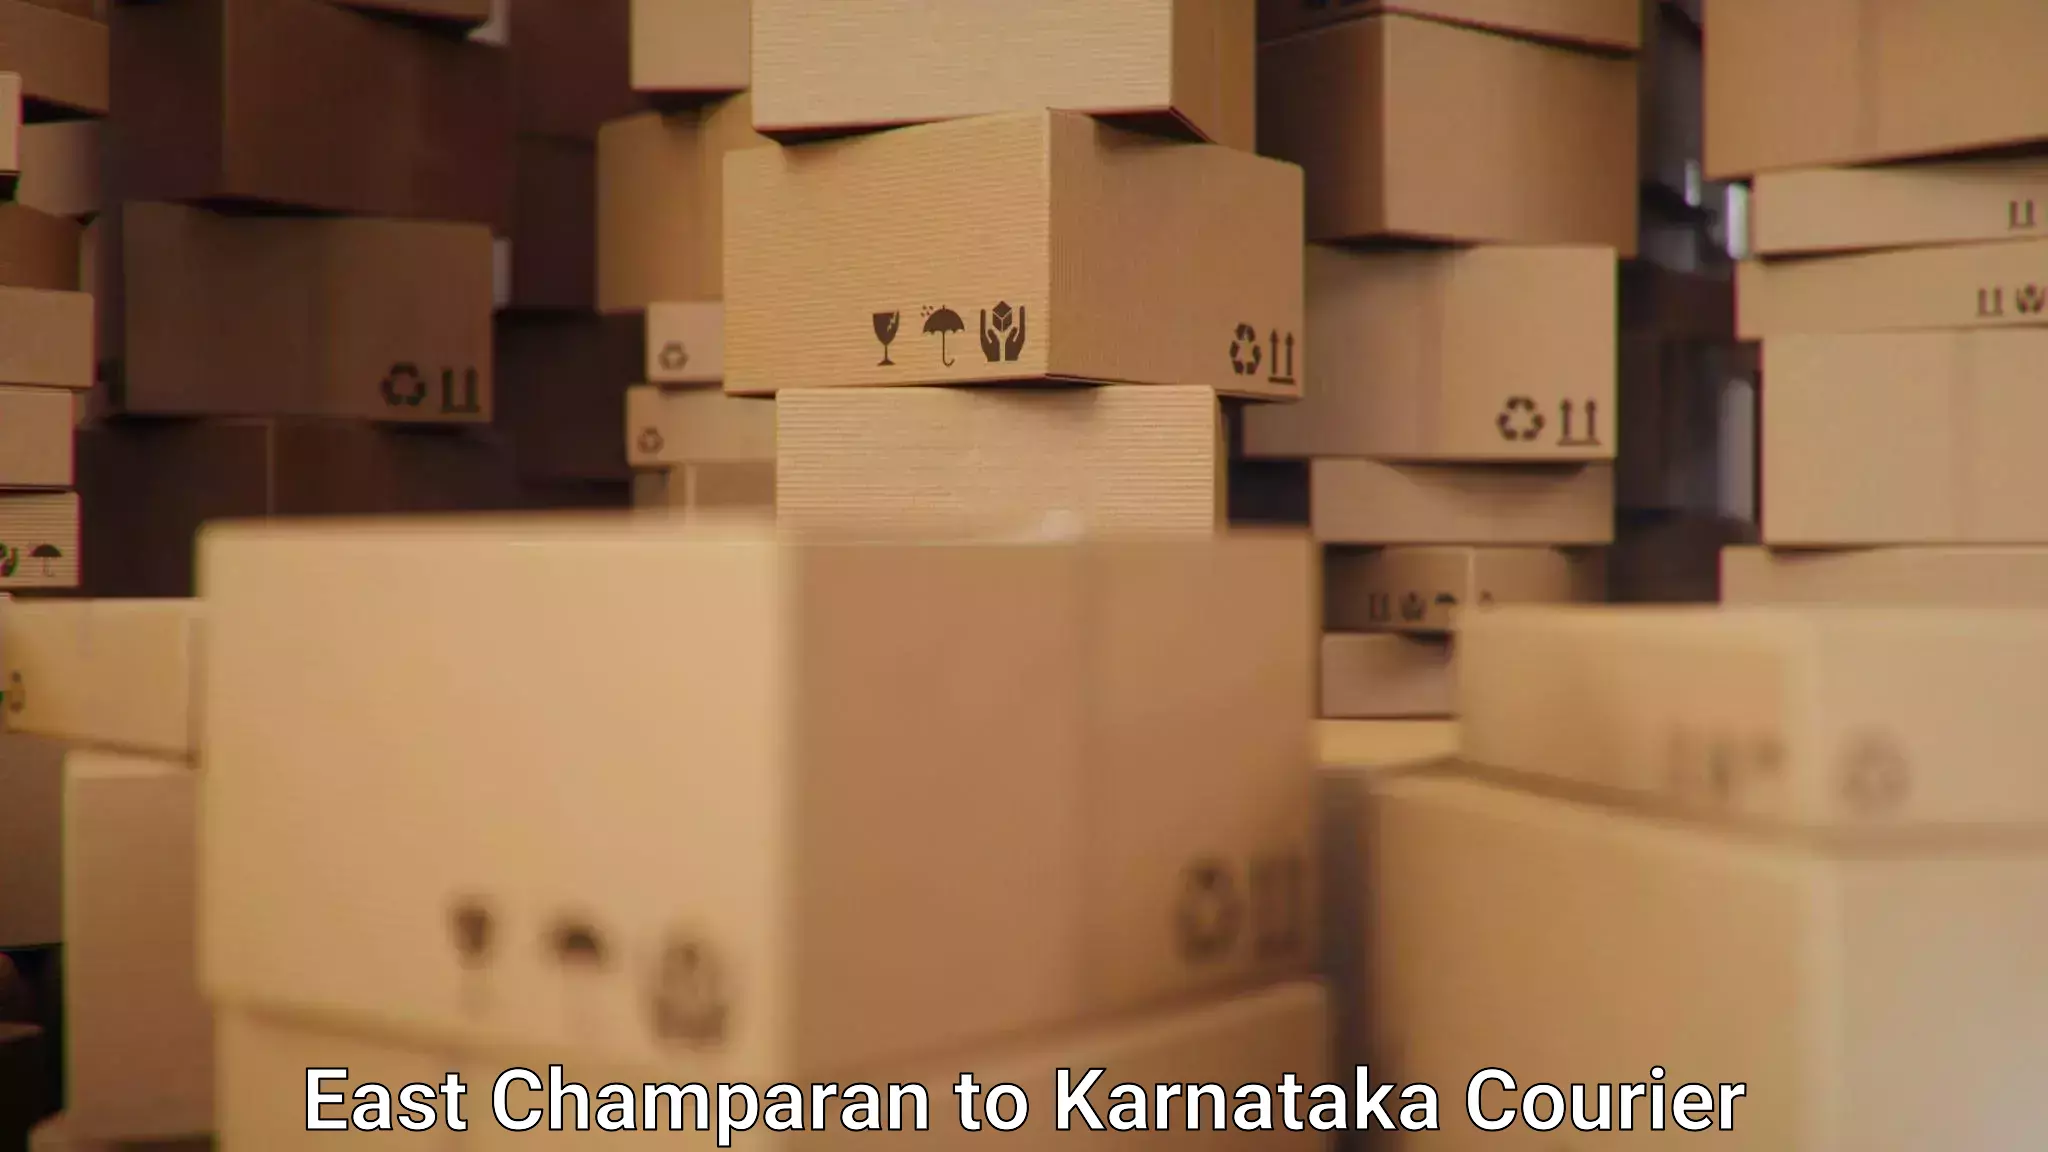 Reliable courier service in East Champaran to Ukkadagatri